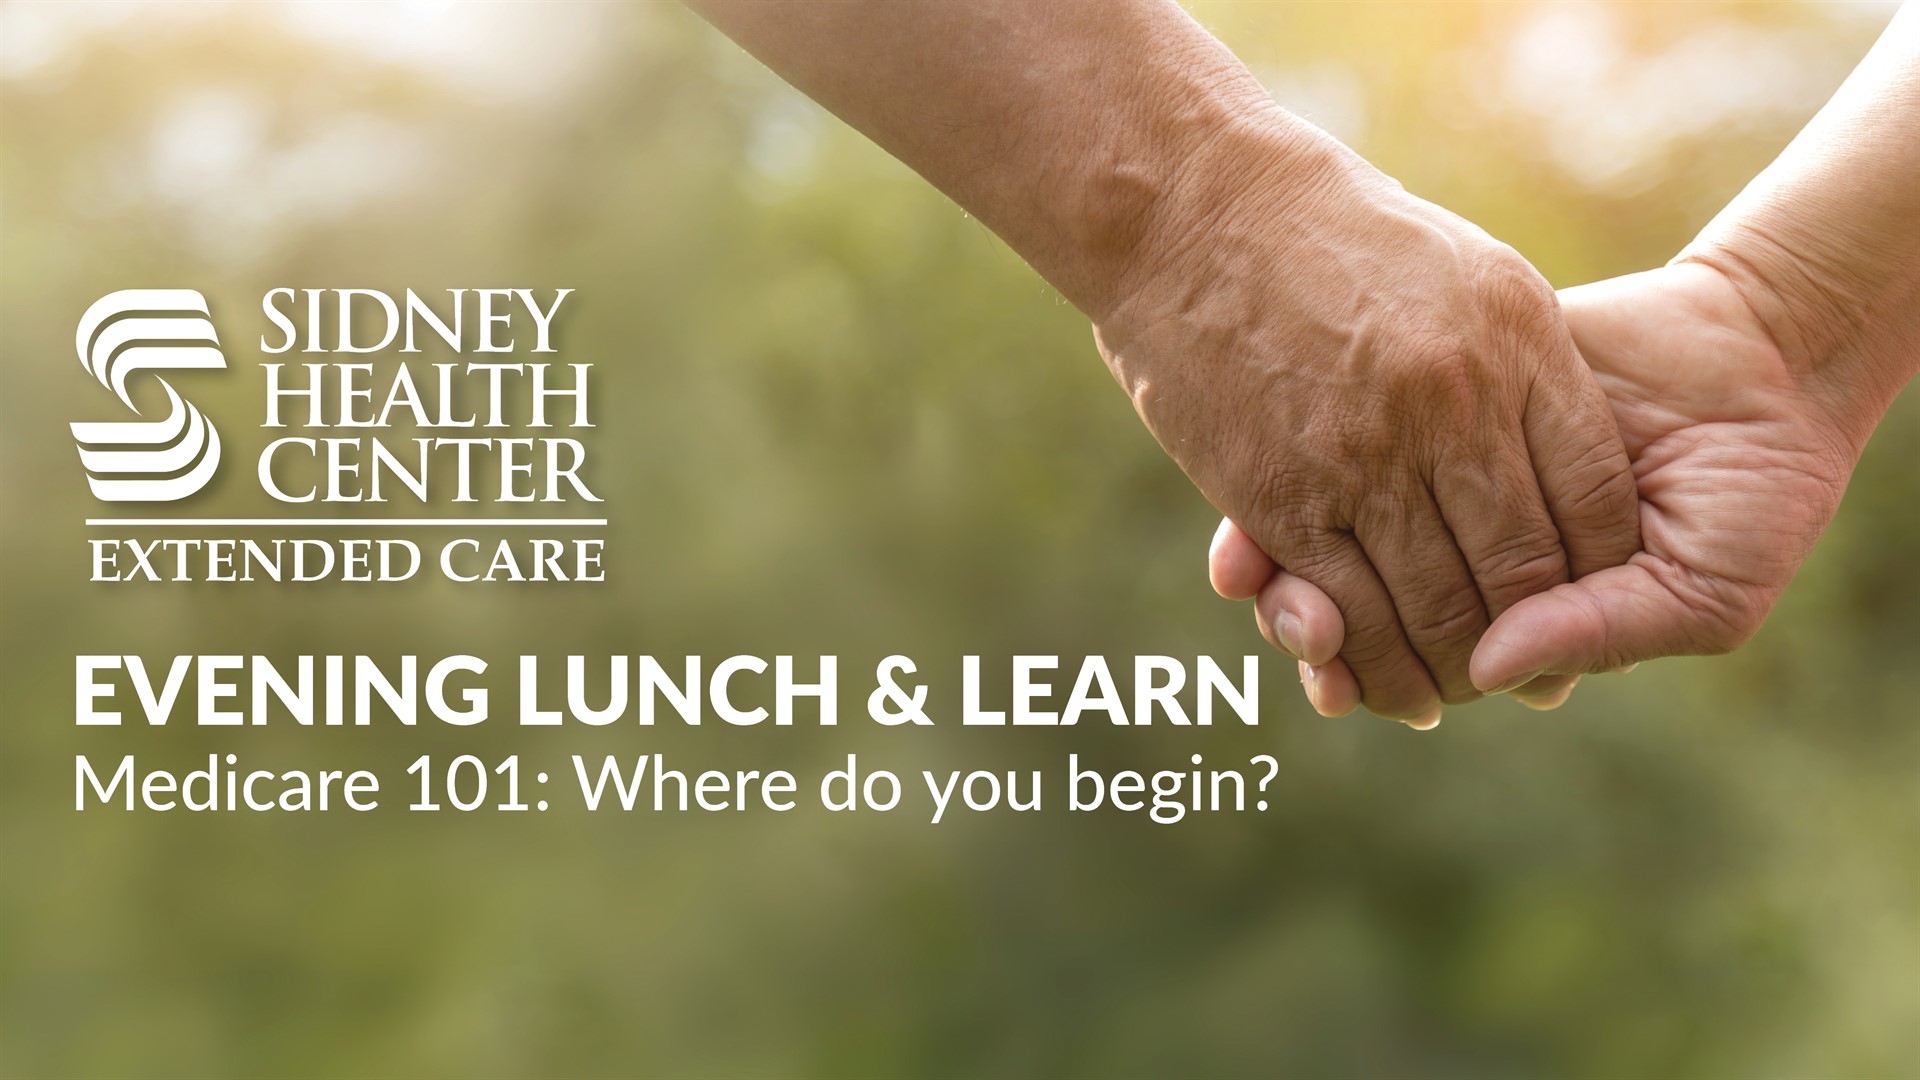 Extended Care Evening Lunch & Learn: Medicare 101